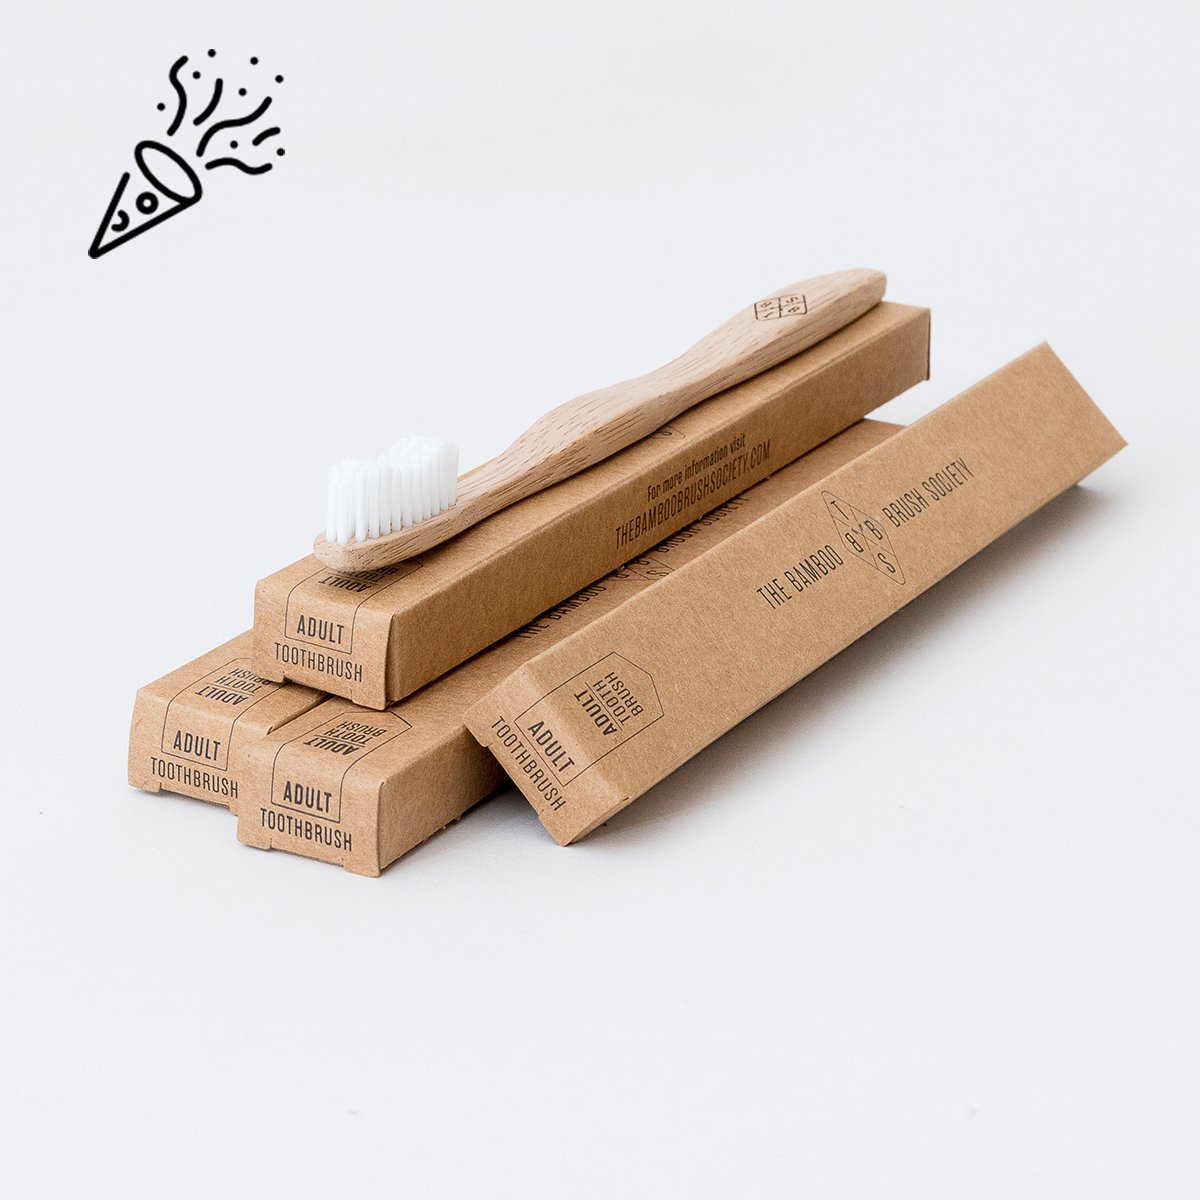 Using a bamboo toothbrush in environmentally friendly packaging is another way to help fight plastic pollution.